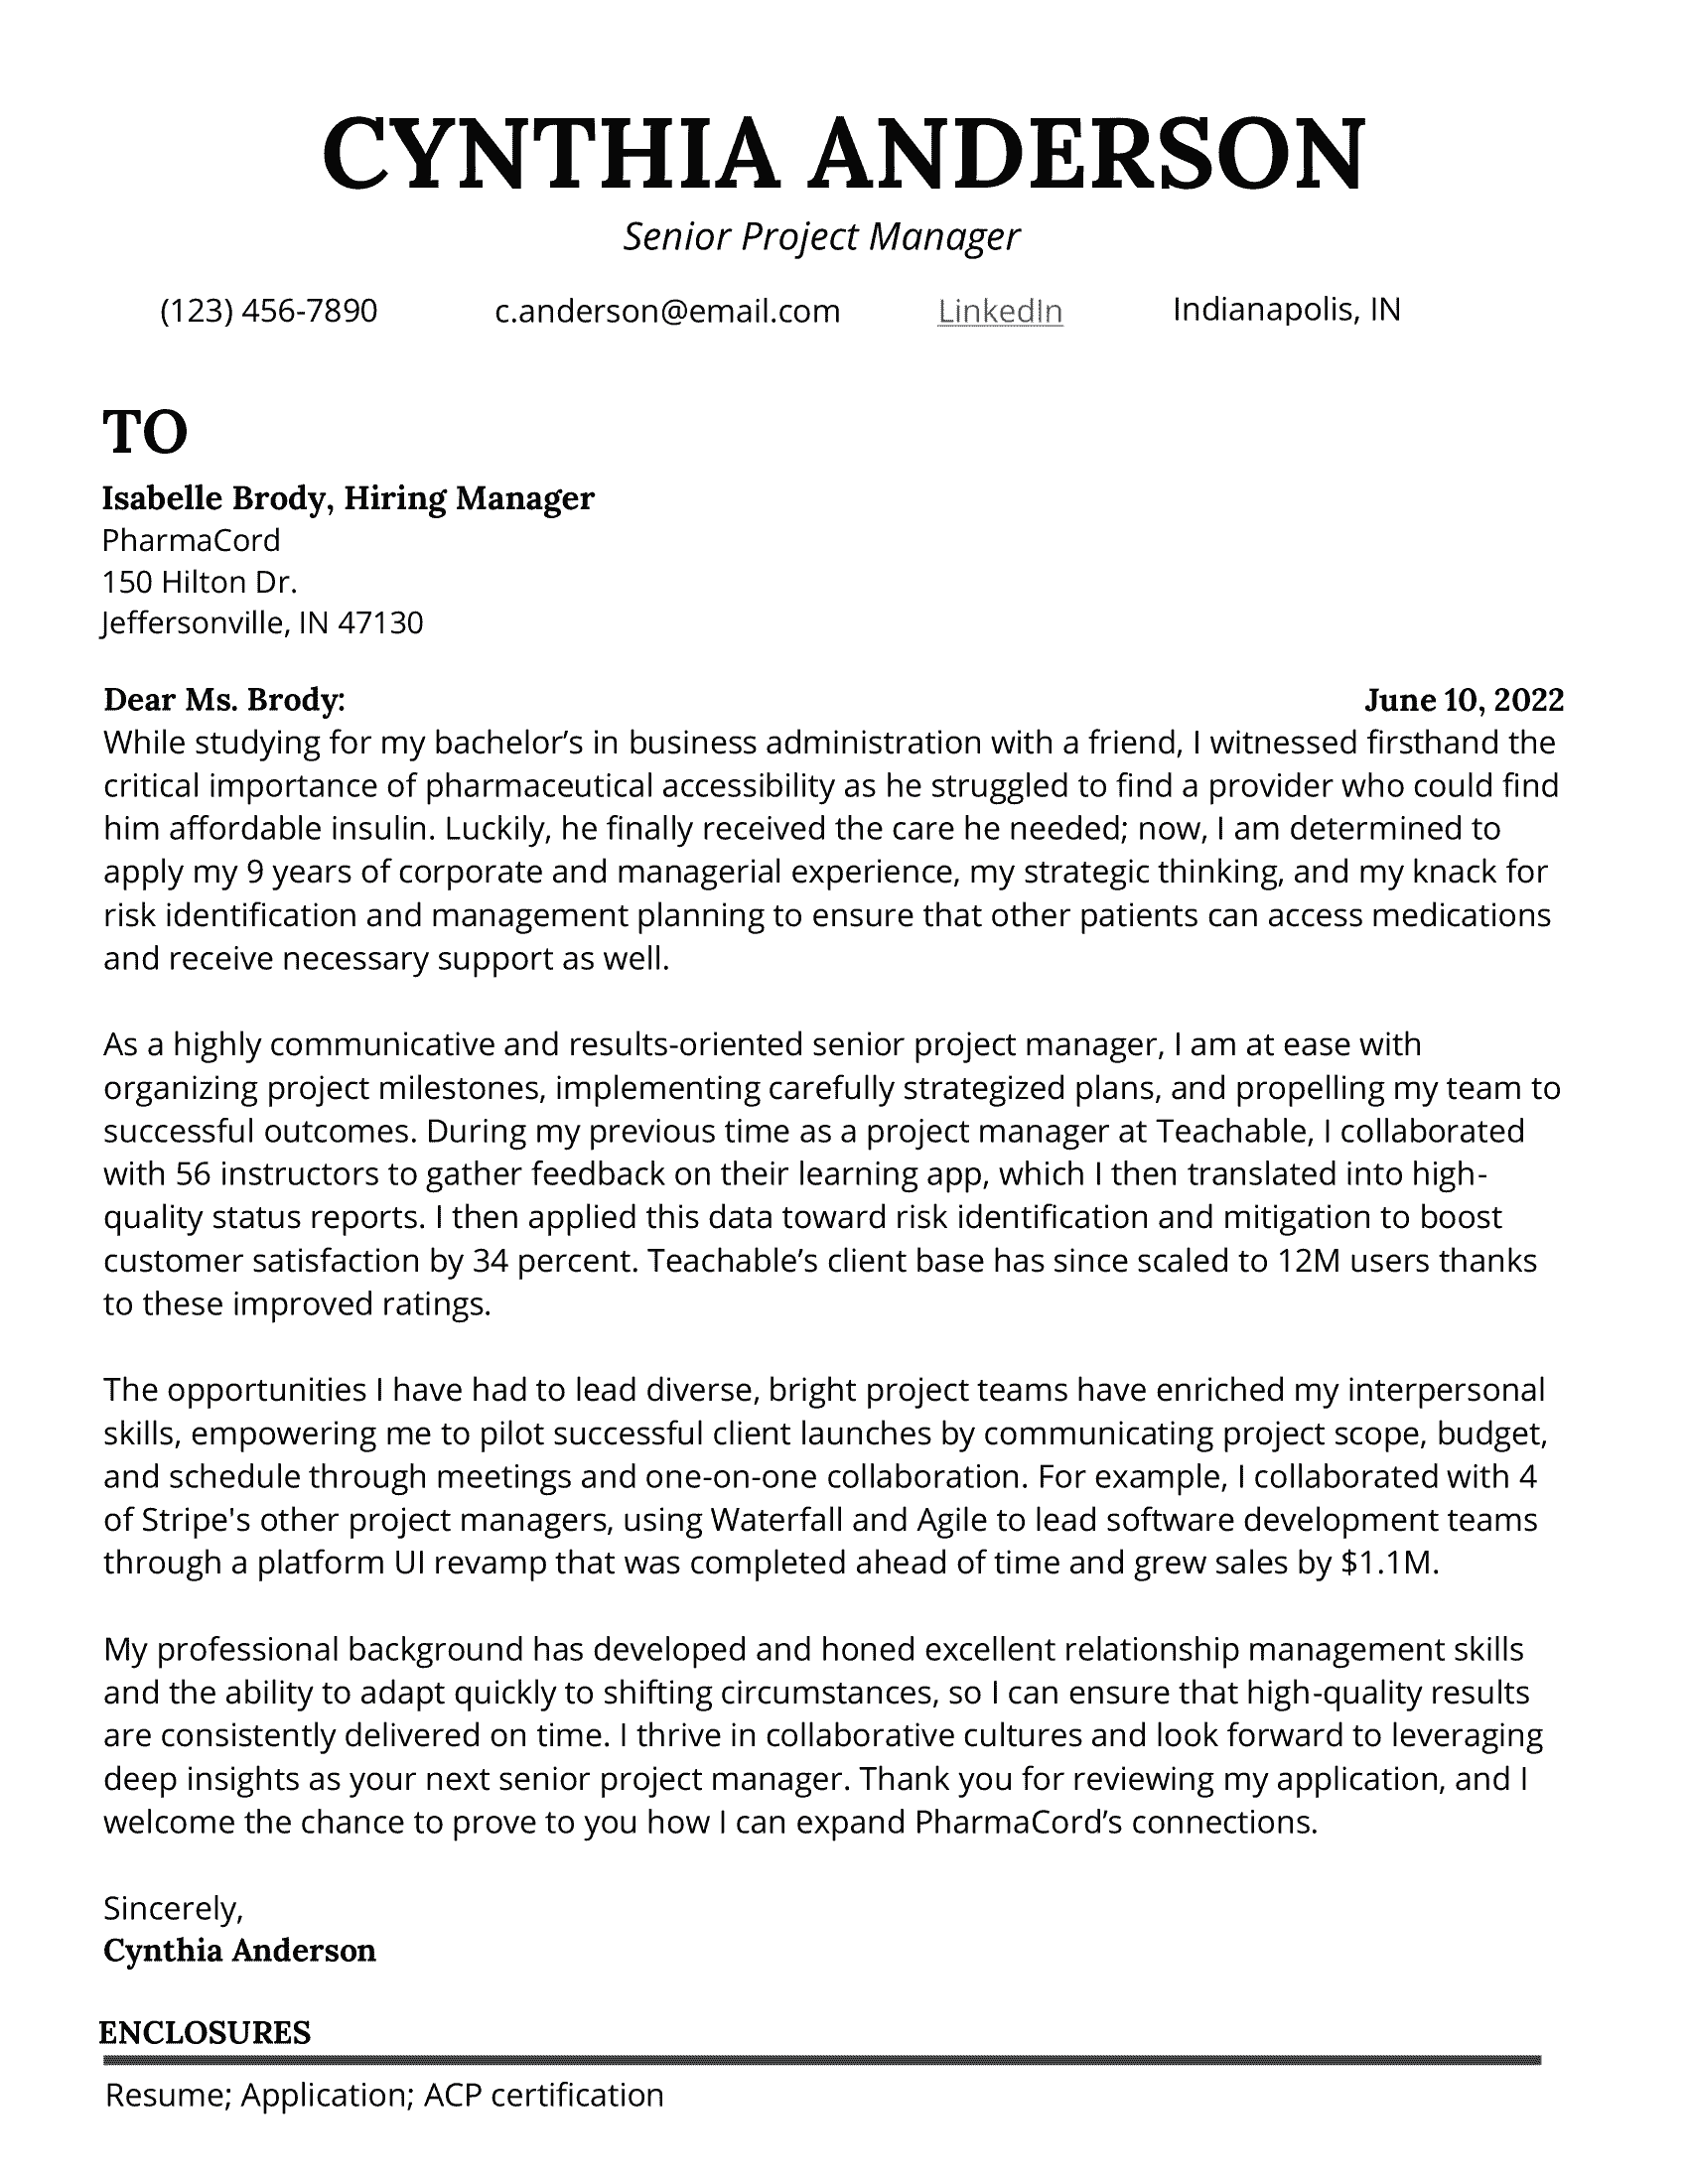 Senior project manager cover letter